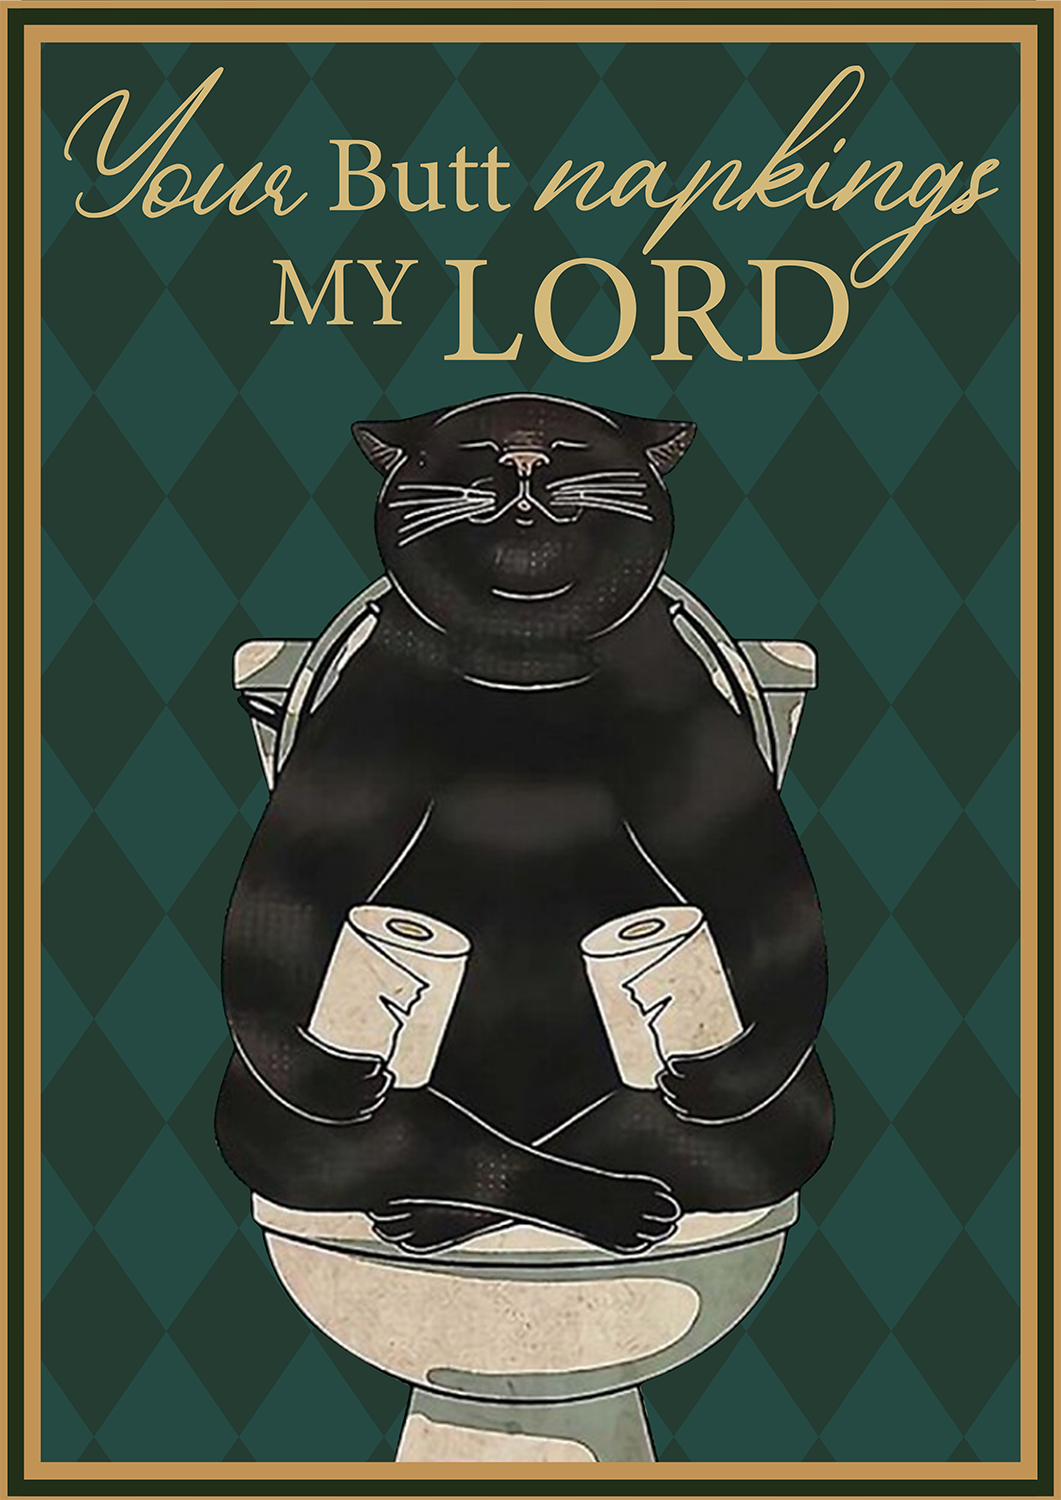 Cat Your Butt Napkins My Lord 11